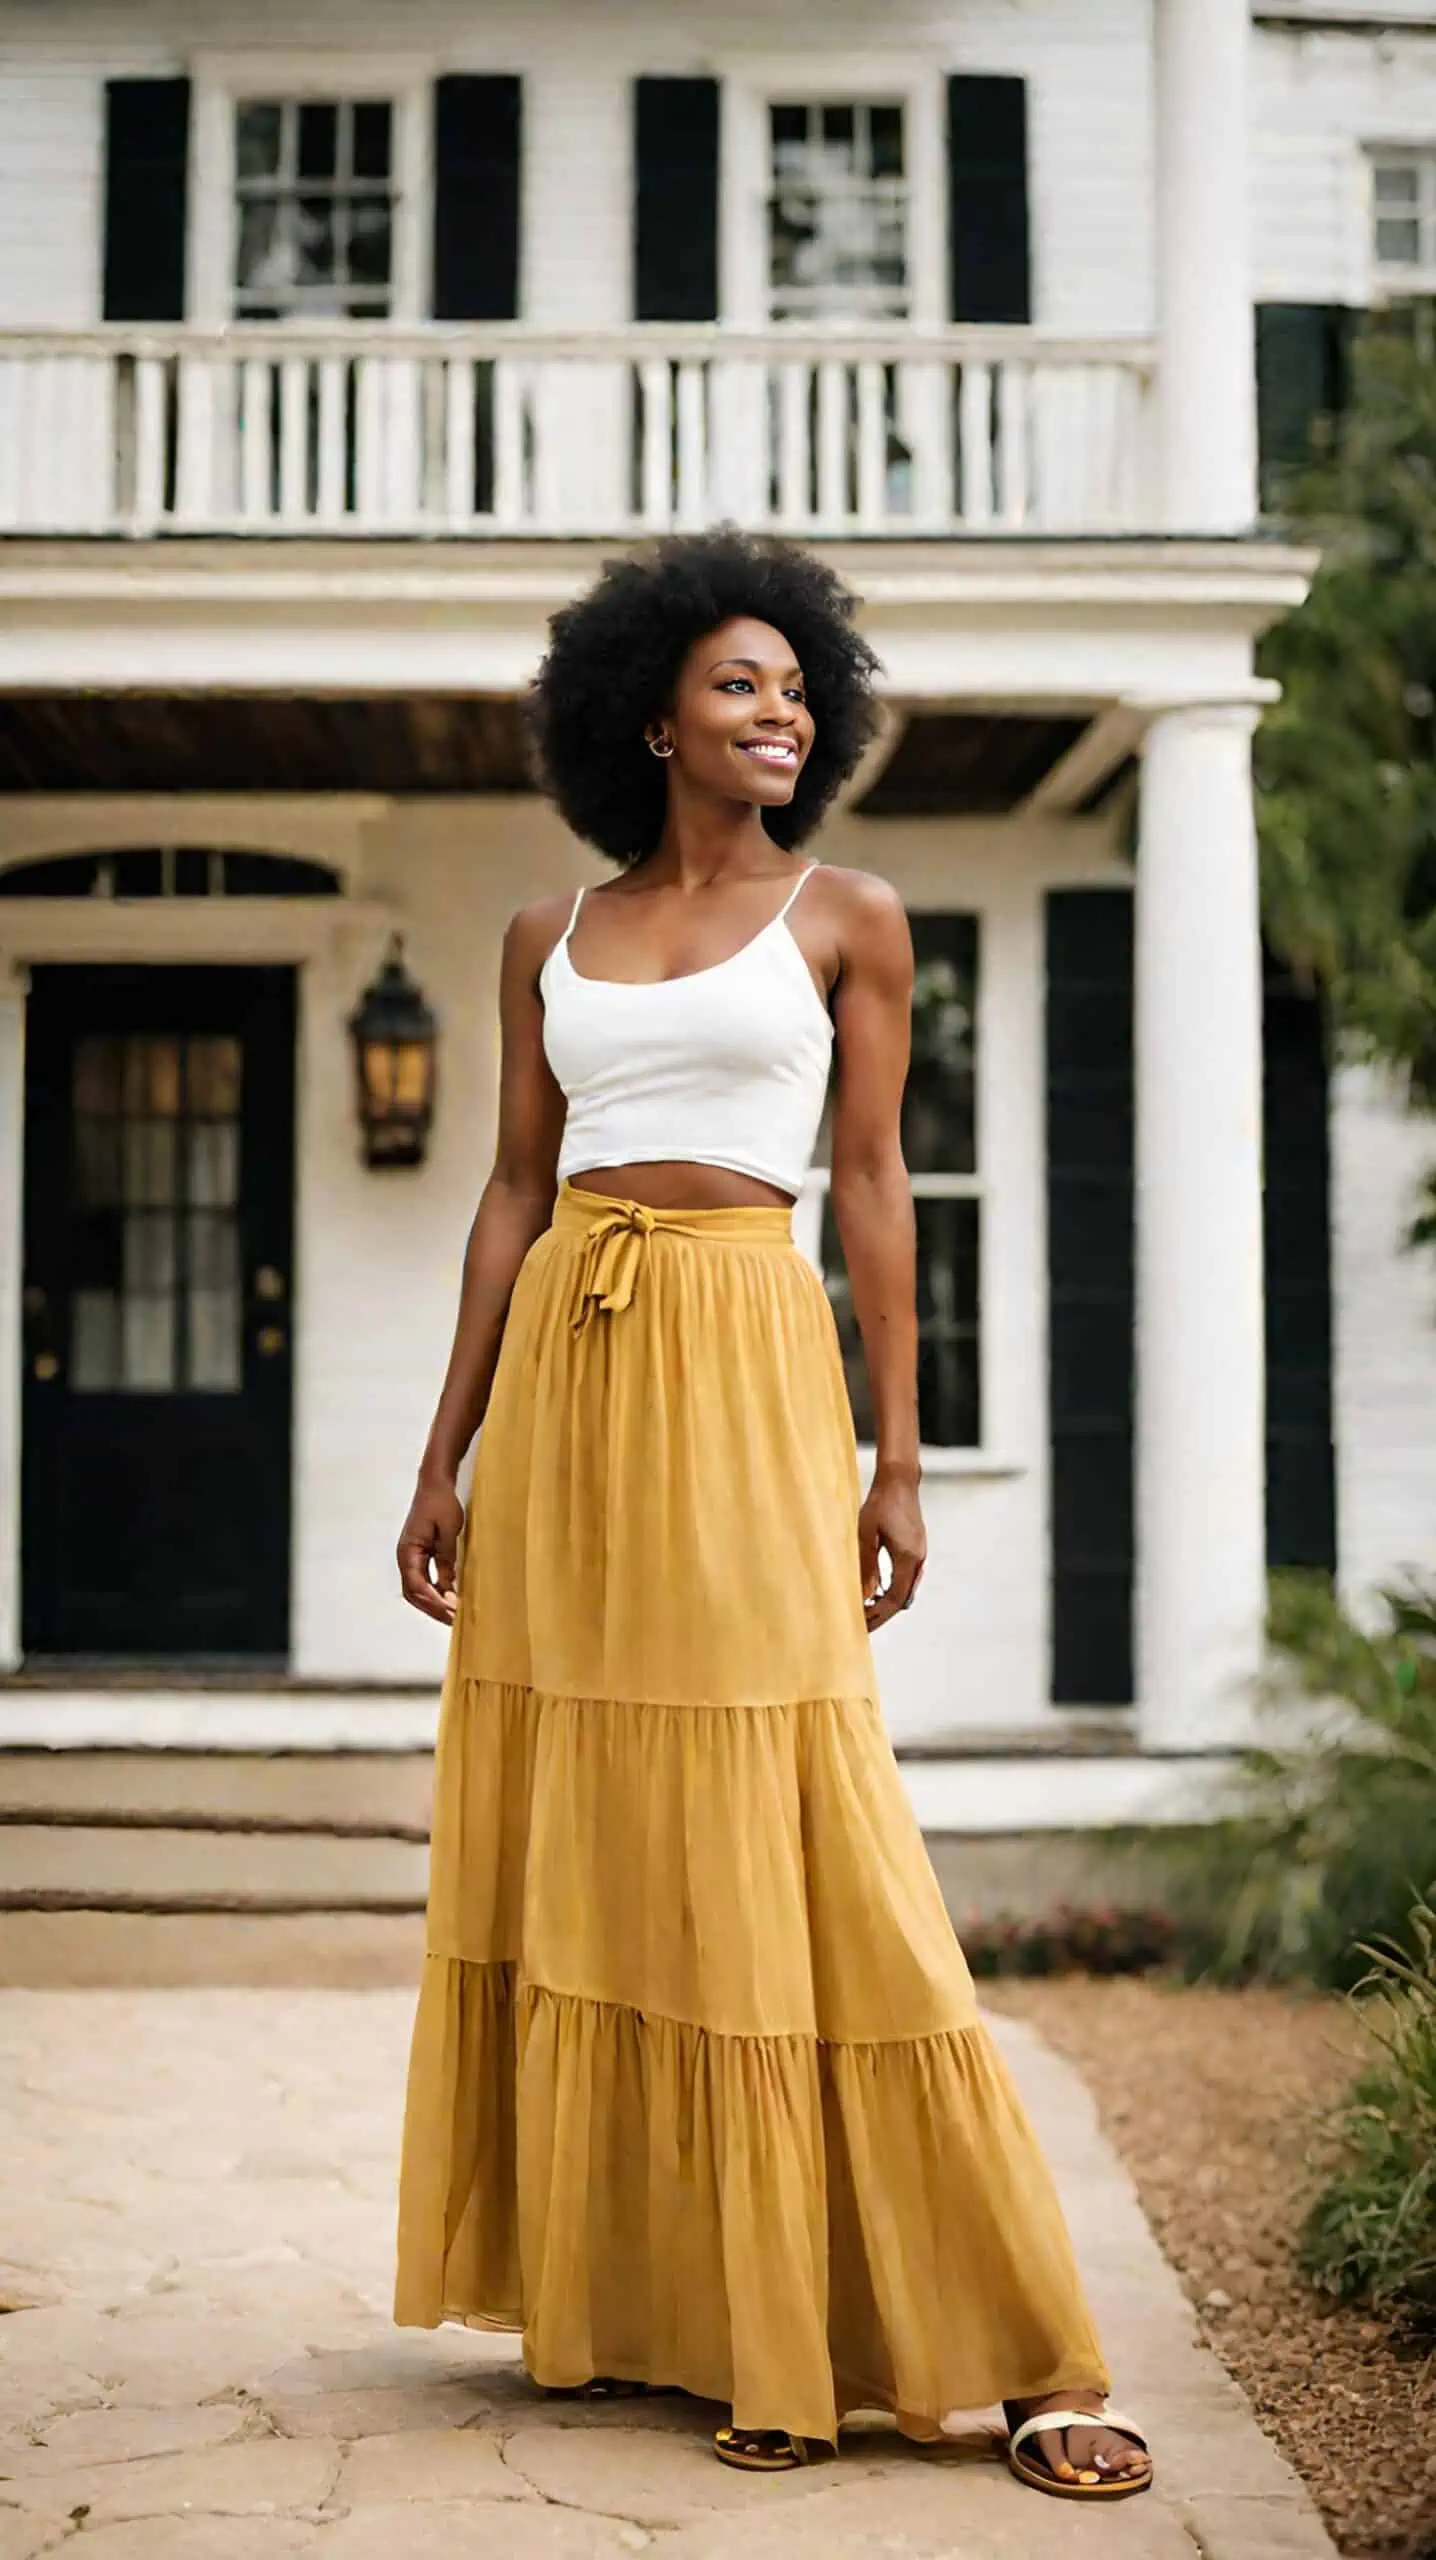 HOW TO STYLE A MAXI SKIRT, 25 Maxi Skirt Outfit Ideas